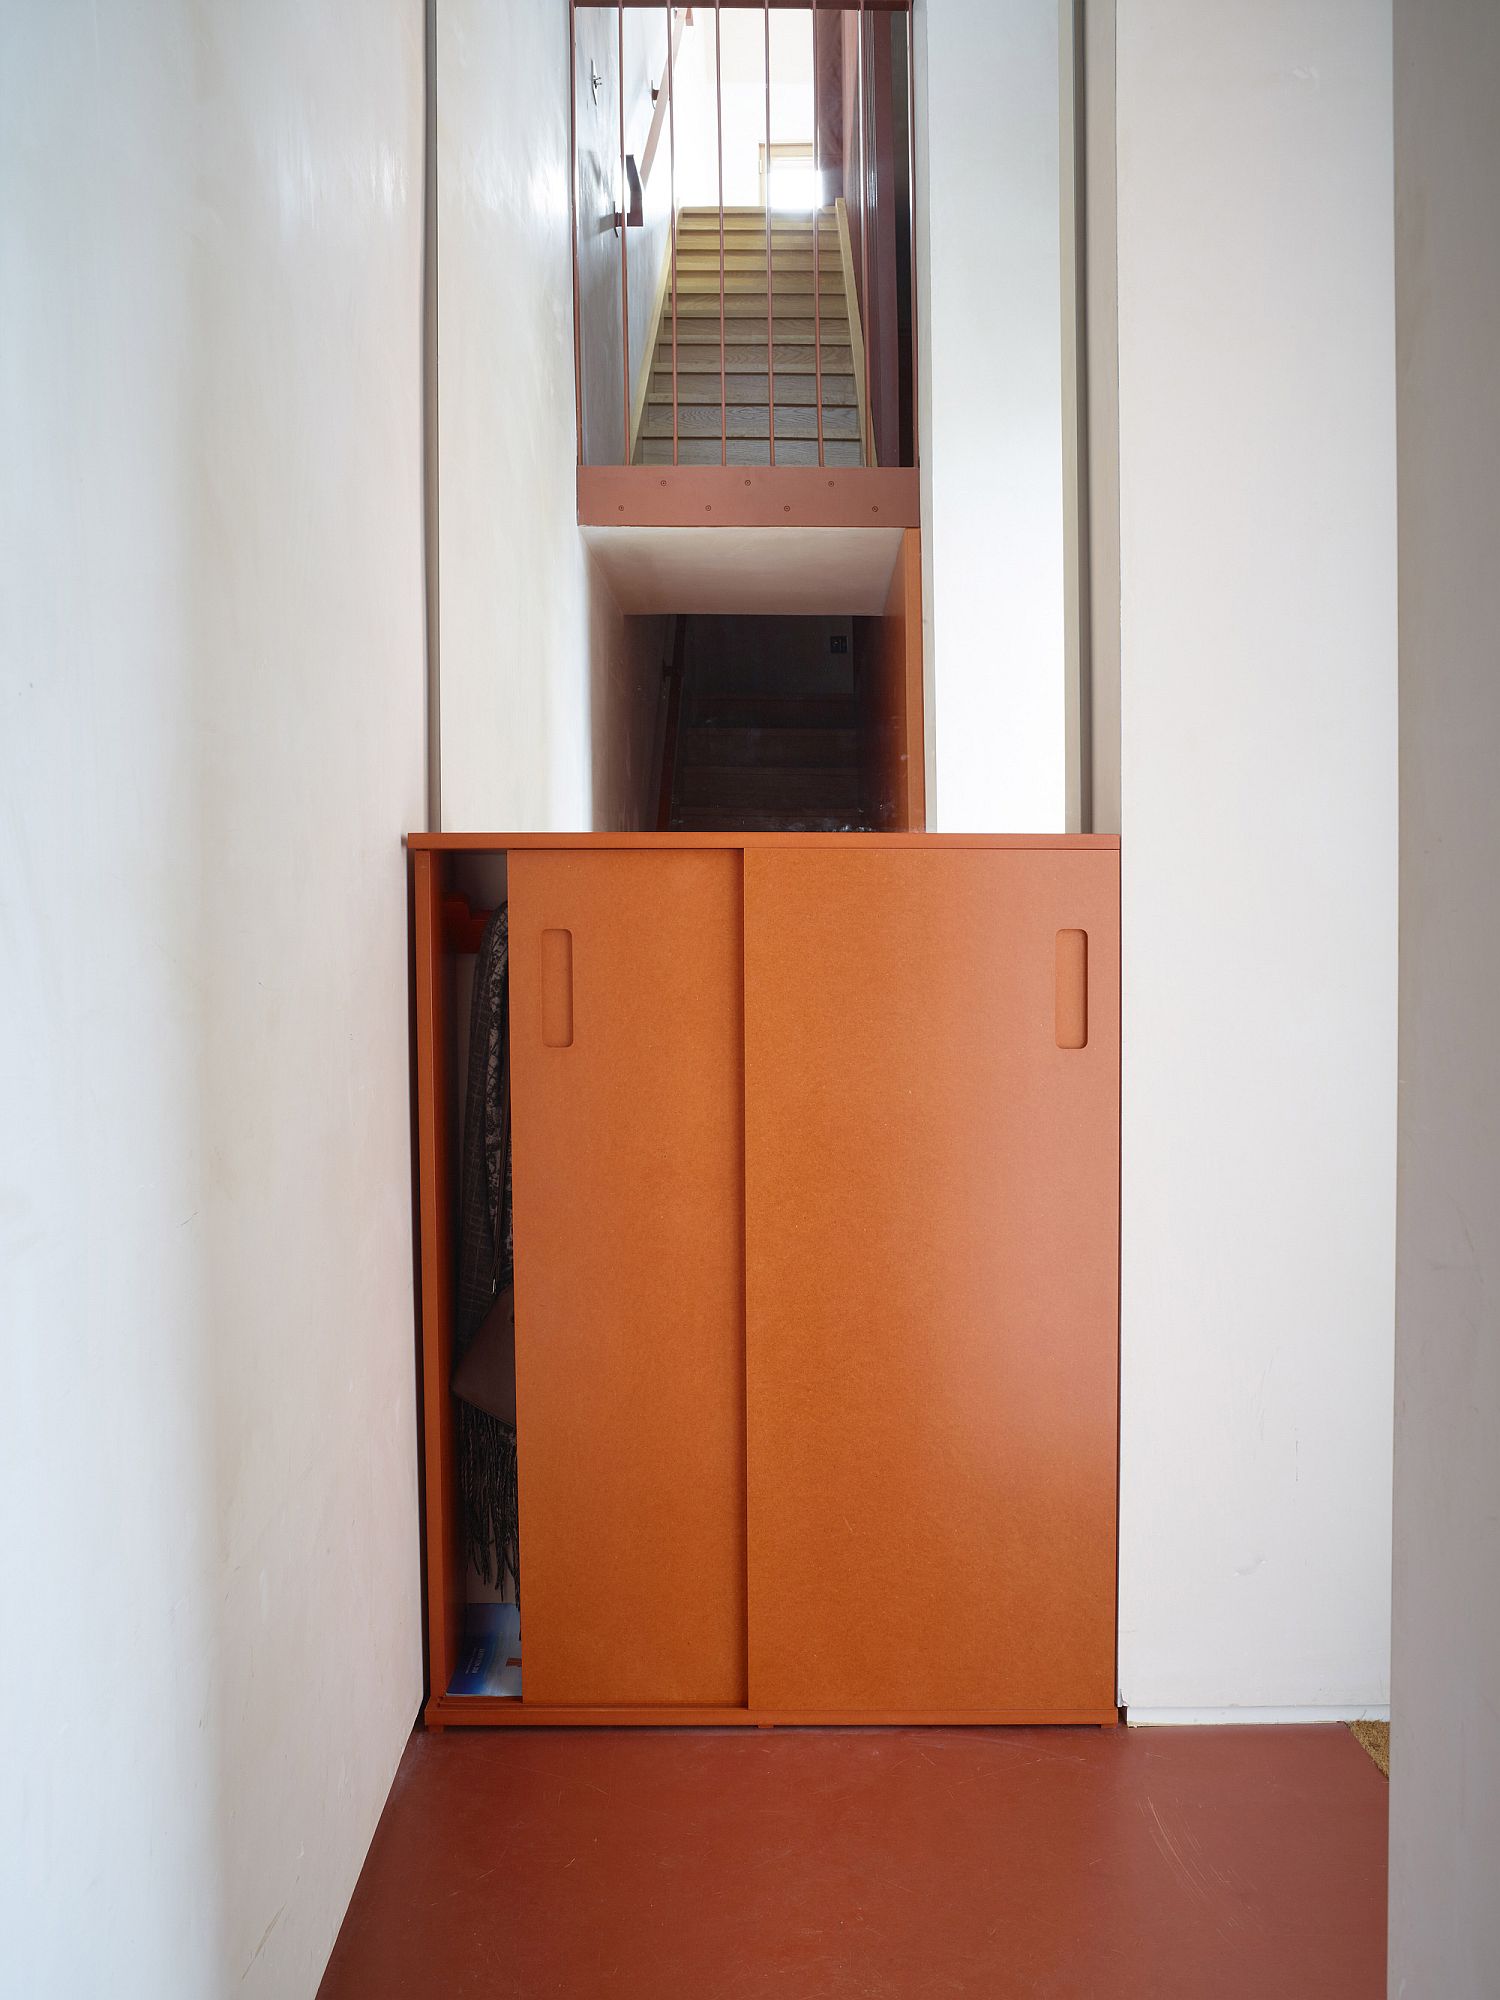 Stairway-and-the-interior-also-embraces-orange-gleefully